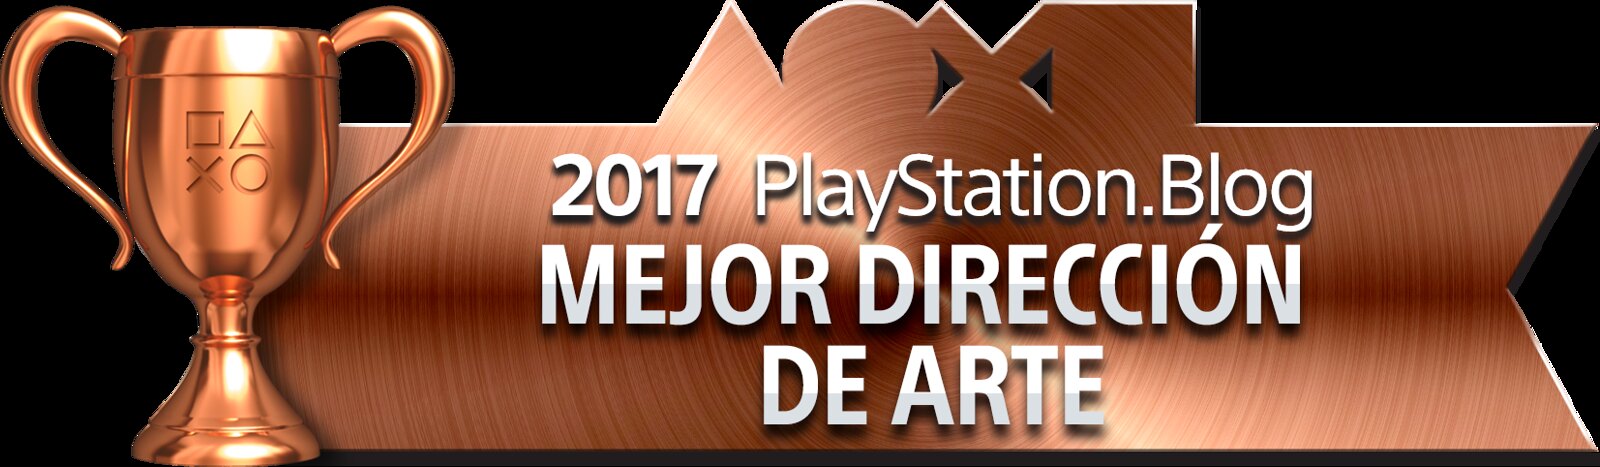 PlayStation Blog Game of the Year 2017 - Best Art Direction (Bronze)